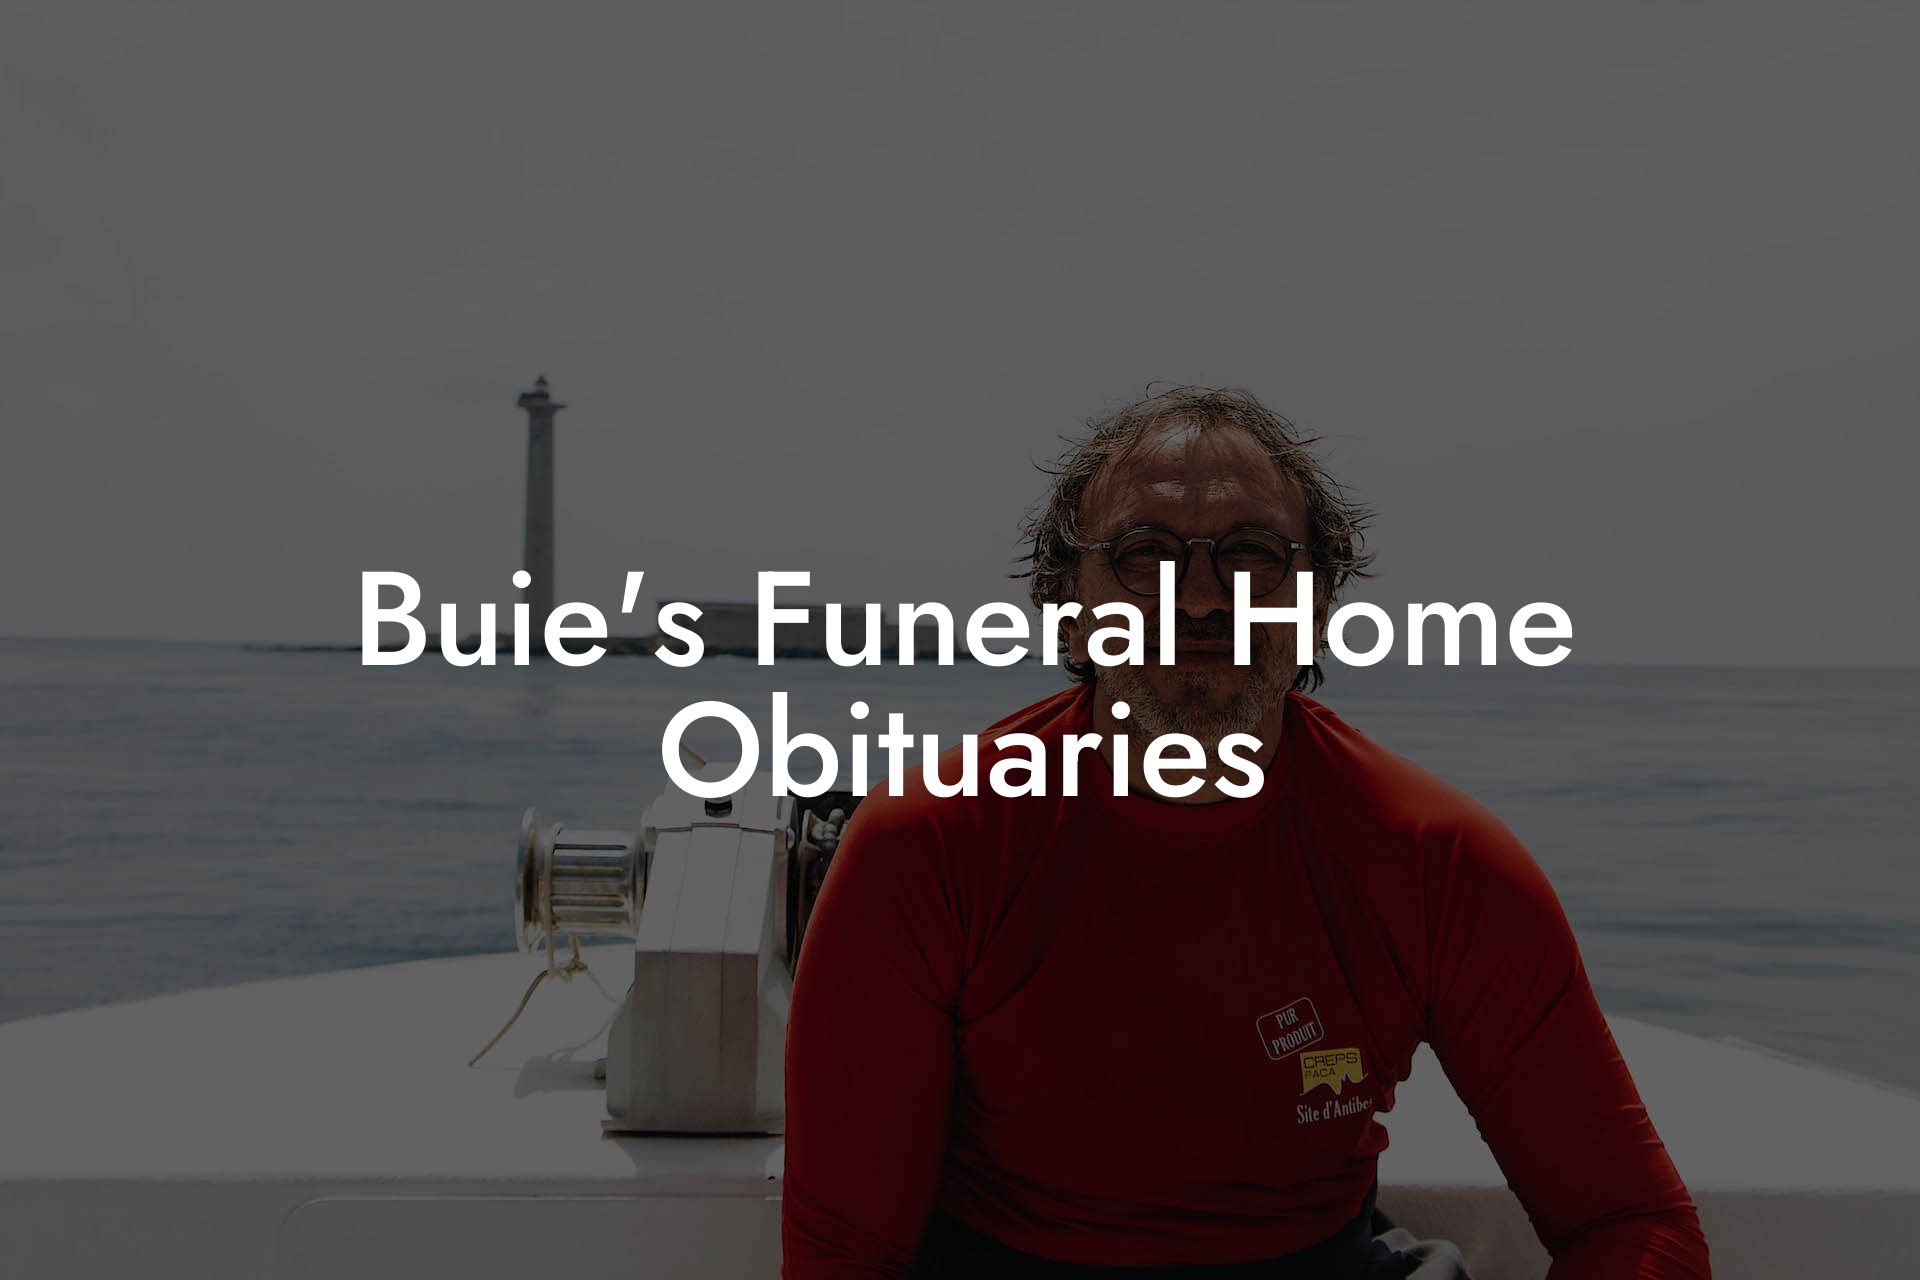 Buie's Funeral Home Obituaries